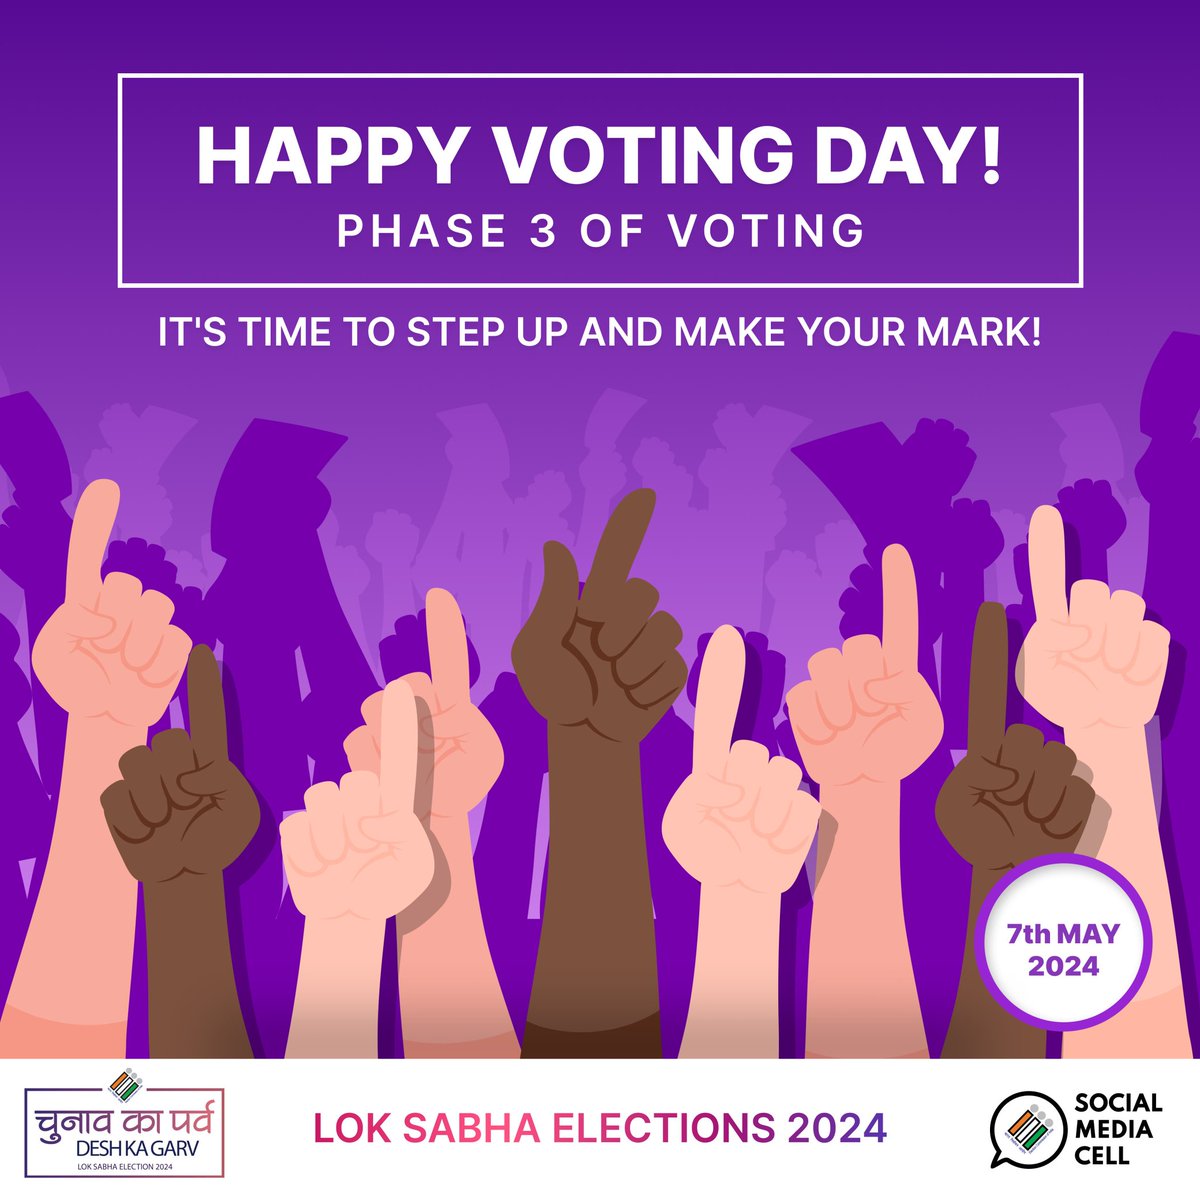 It's the polling day ! #Phase3 #GeneralElections2024 Join us in Celebration of #ChunavKaParv by casting your votes 🎉🎉. #YouAreTheOne. #IVote4Sure #DeshKaGarv #LokSabhaElections2024